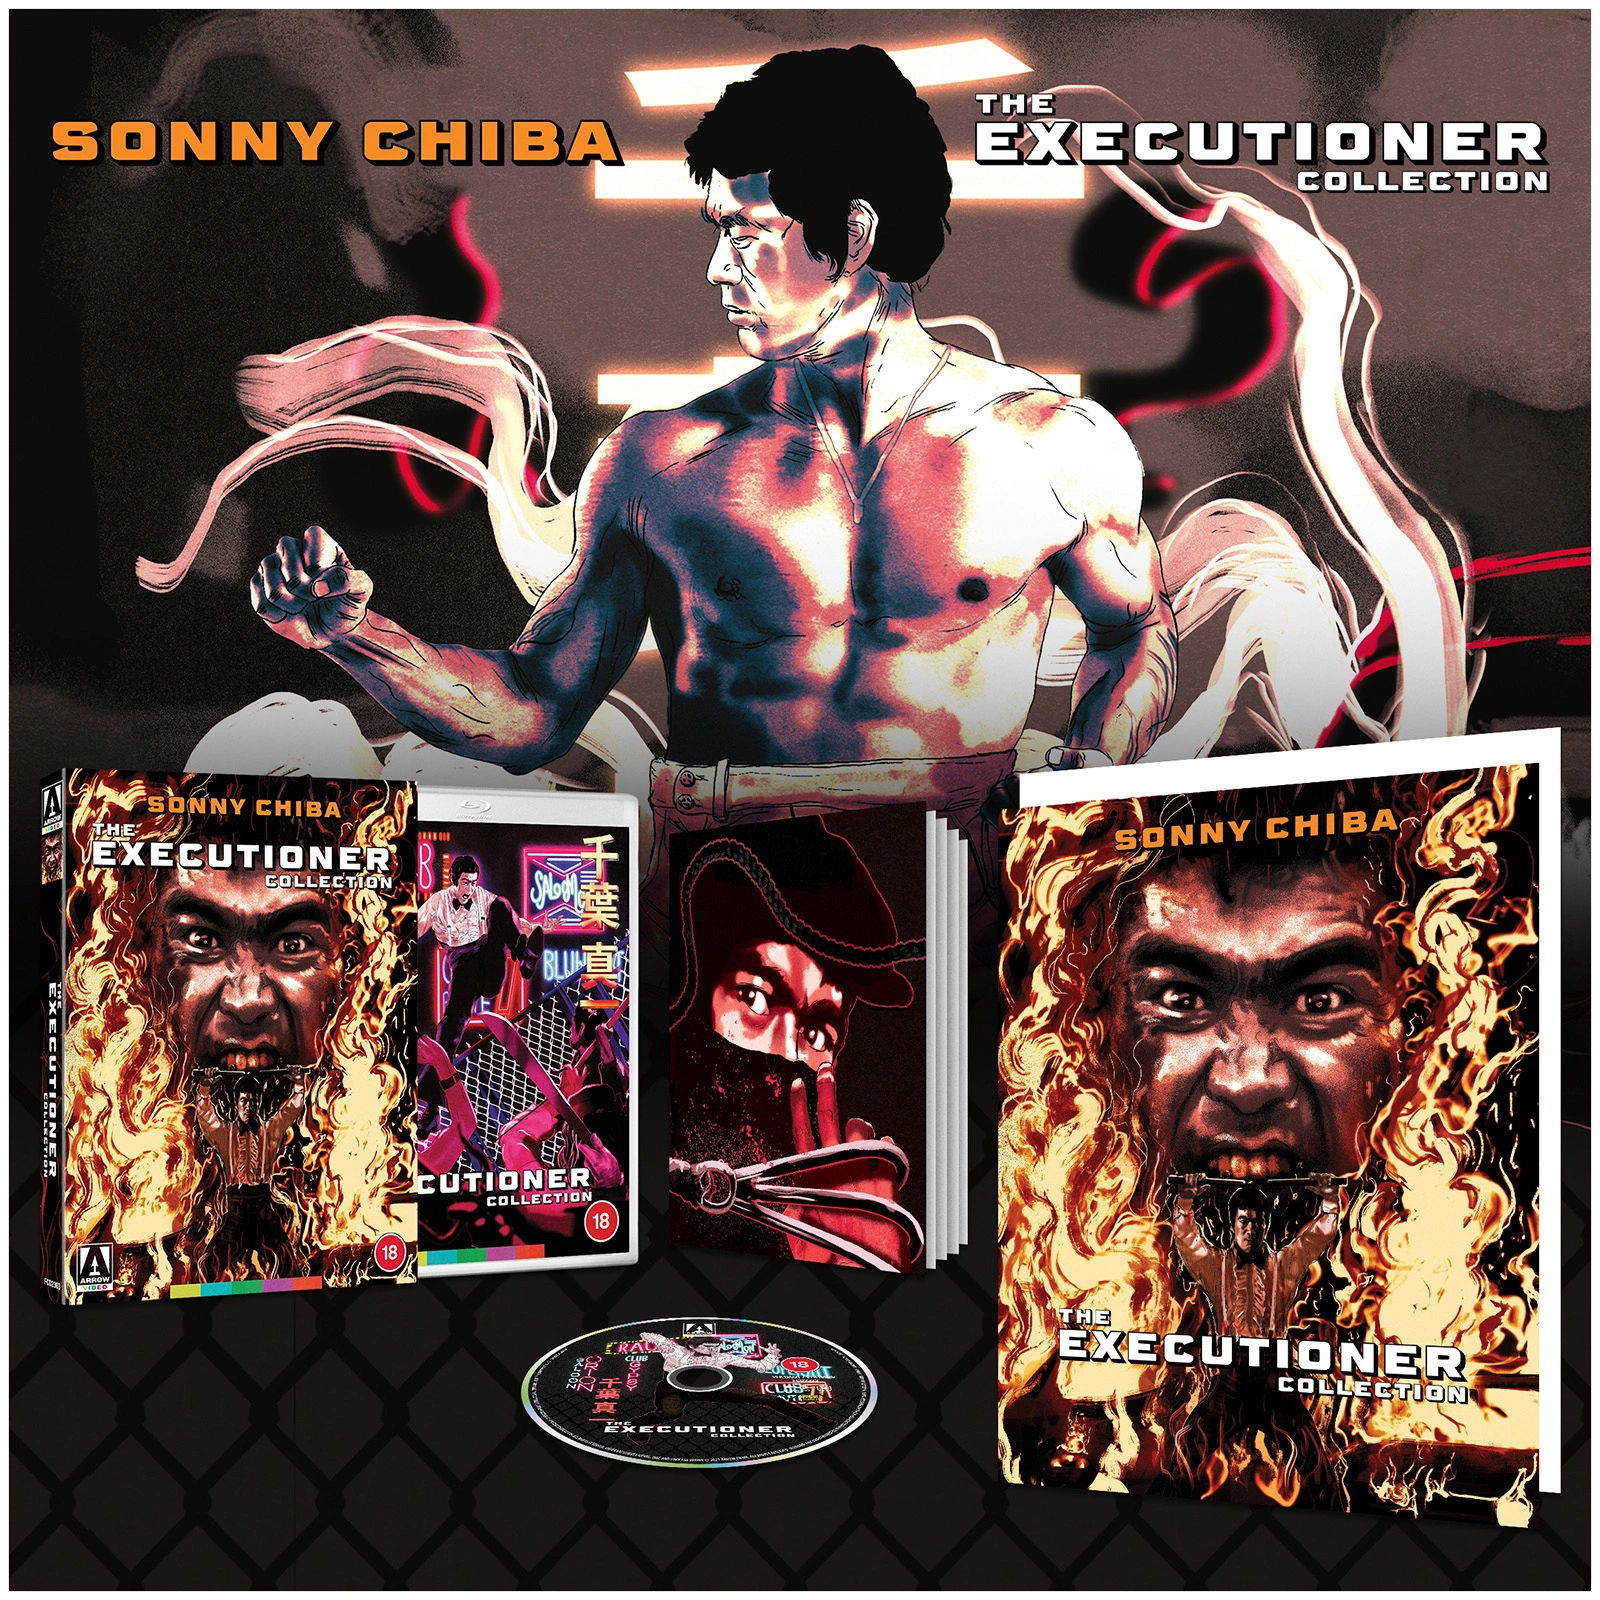 Image showing the Executioner Collection. Text on the image reads Sonny Chiba. The Executioner Collection